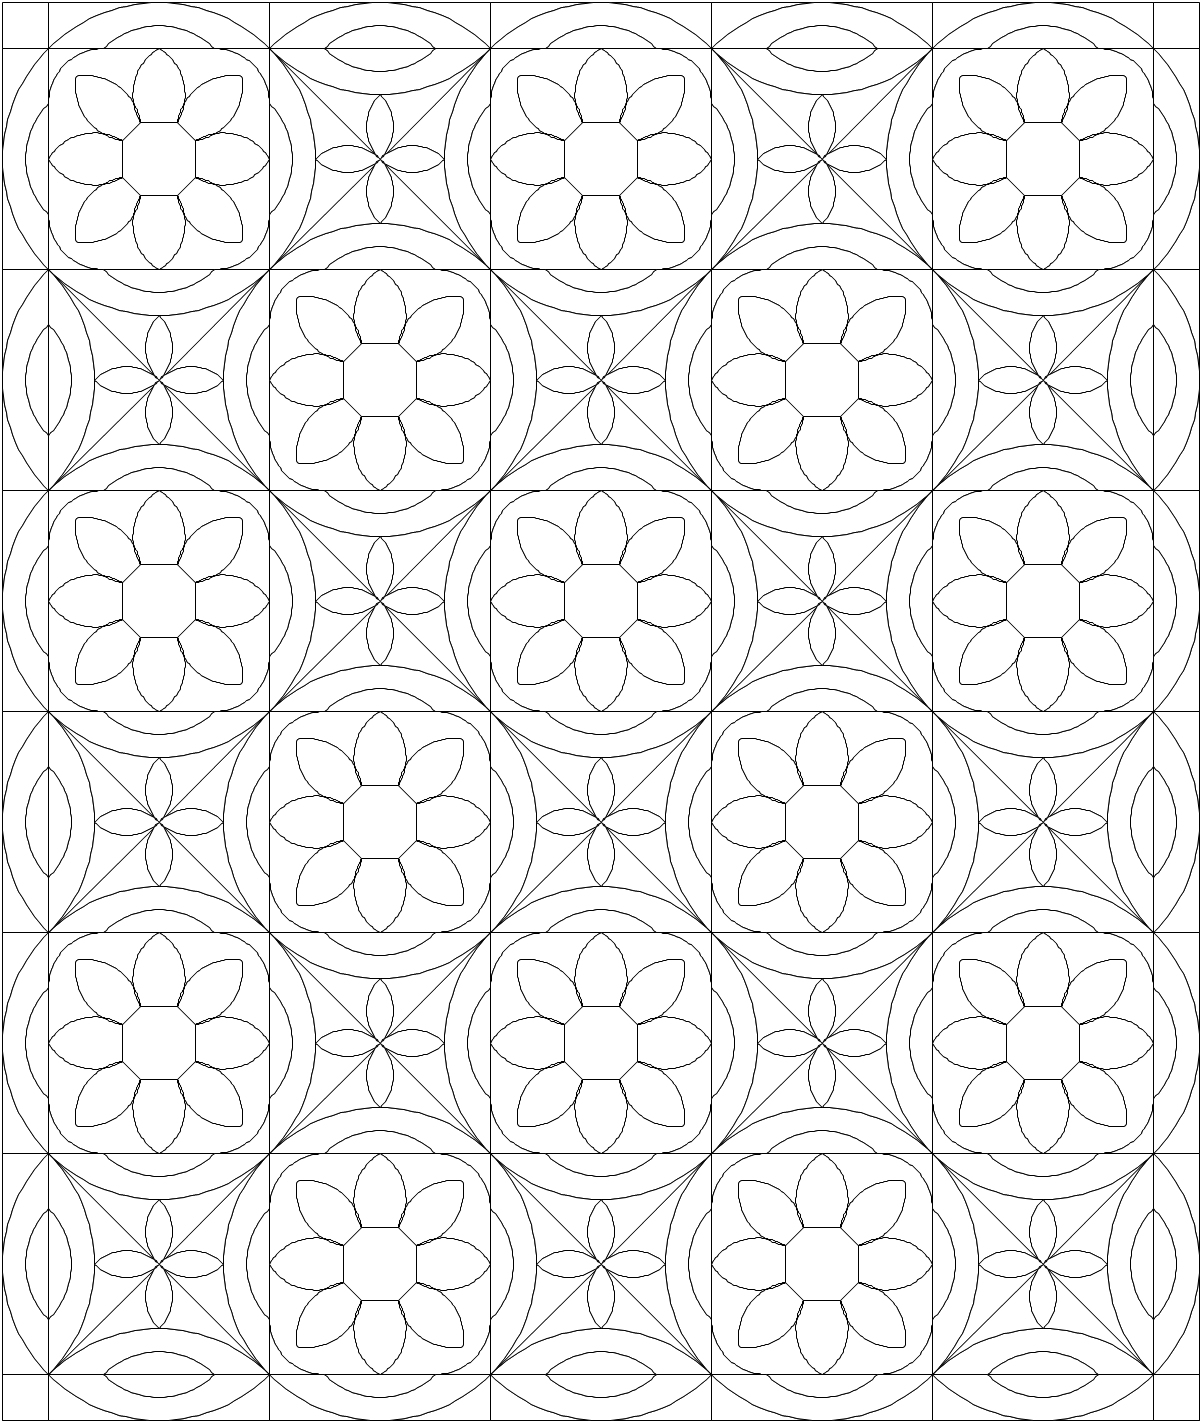 Quilt coloring pages to download and print for free